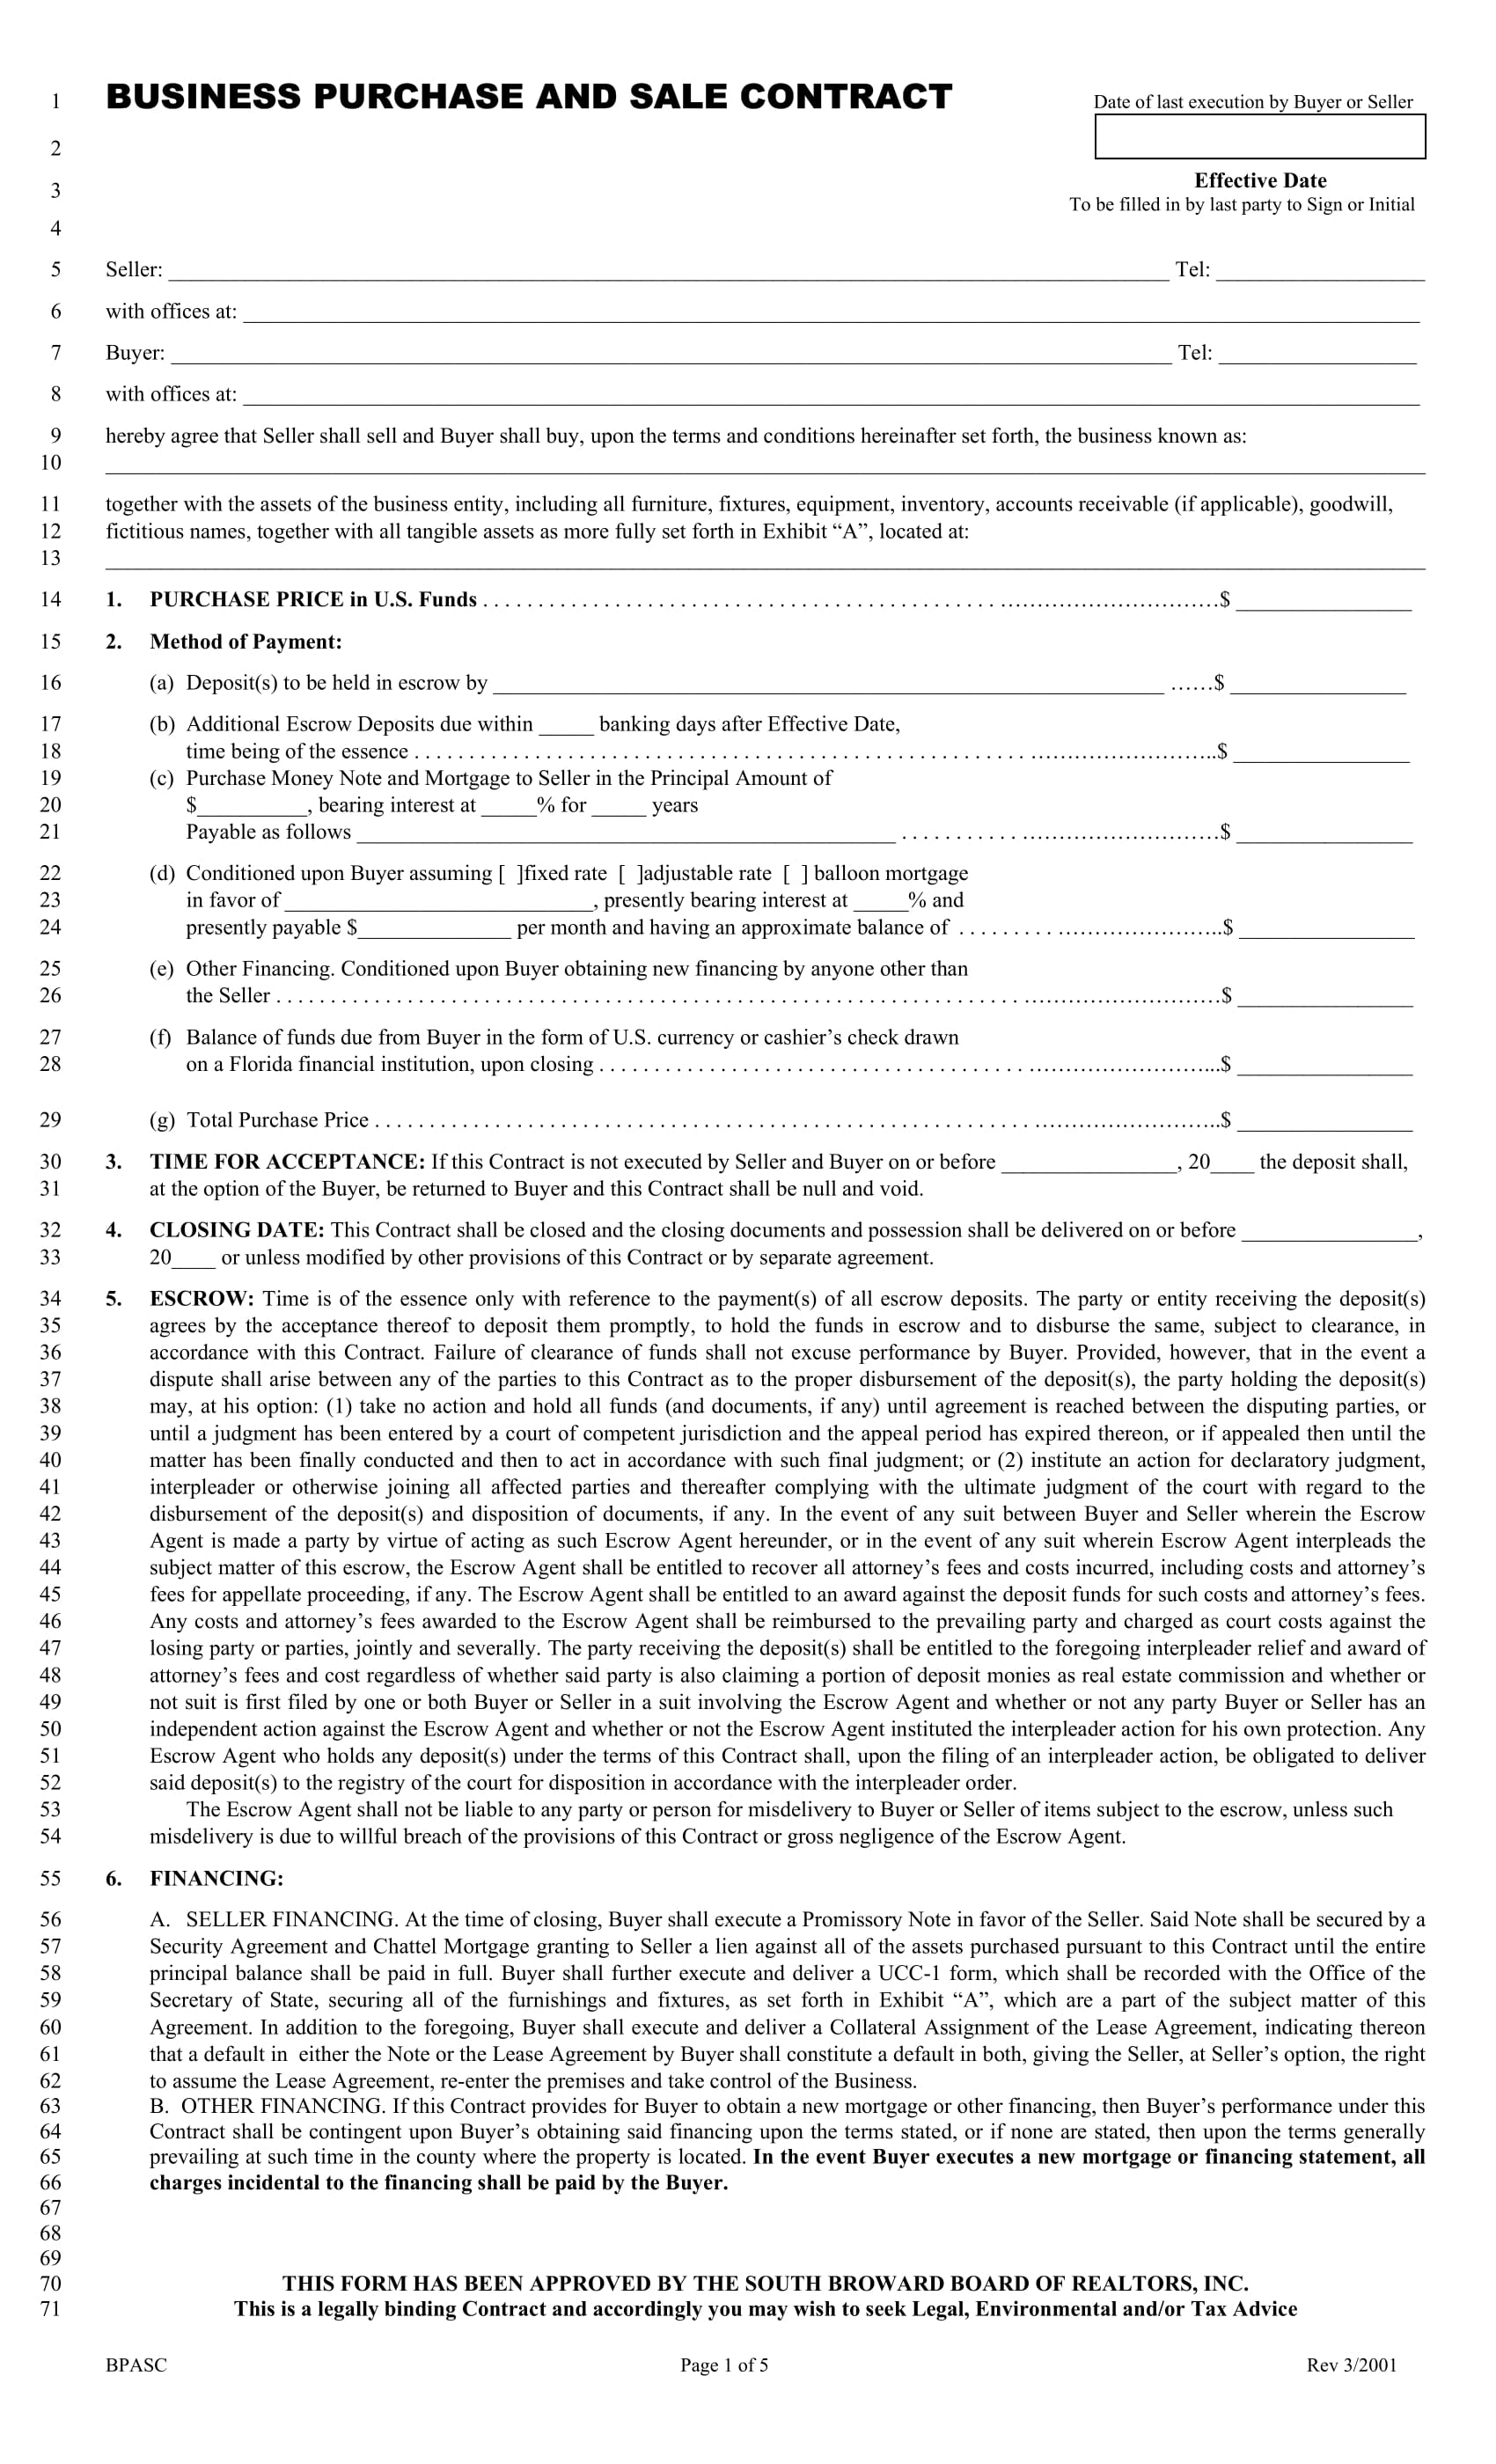 business purchase and sale contract form 1